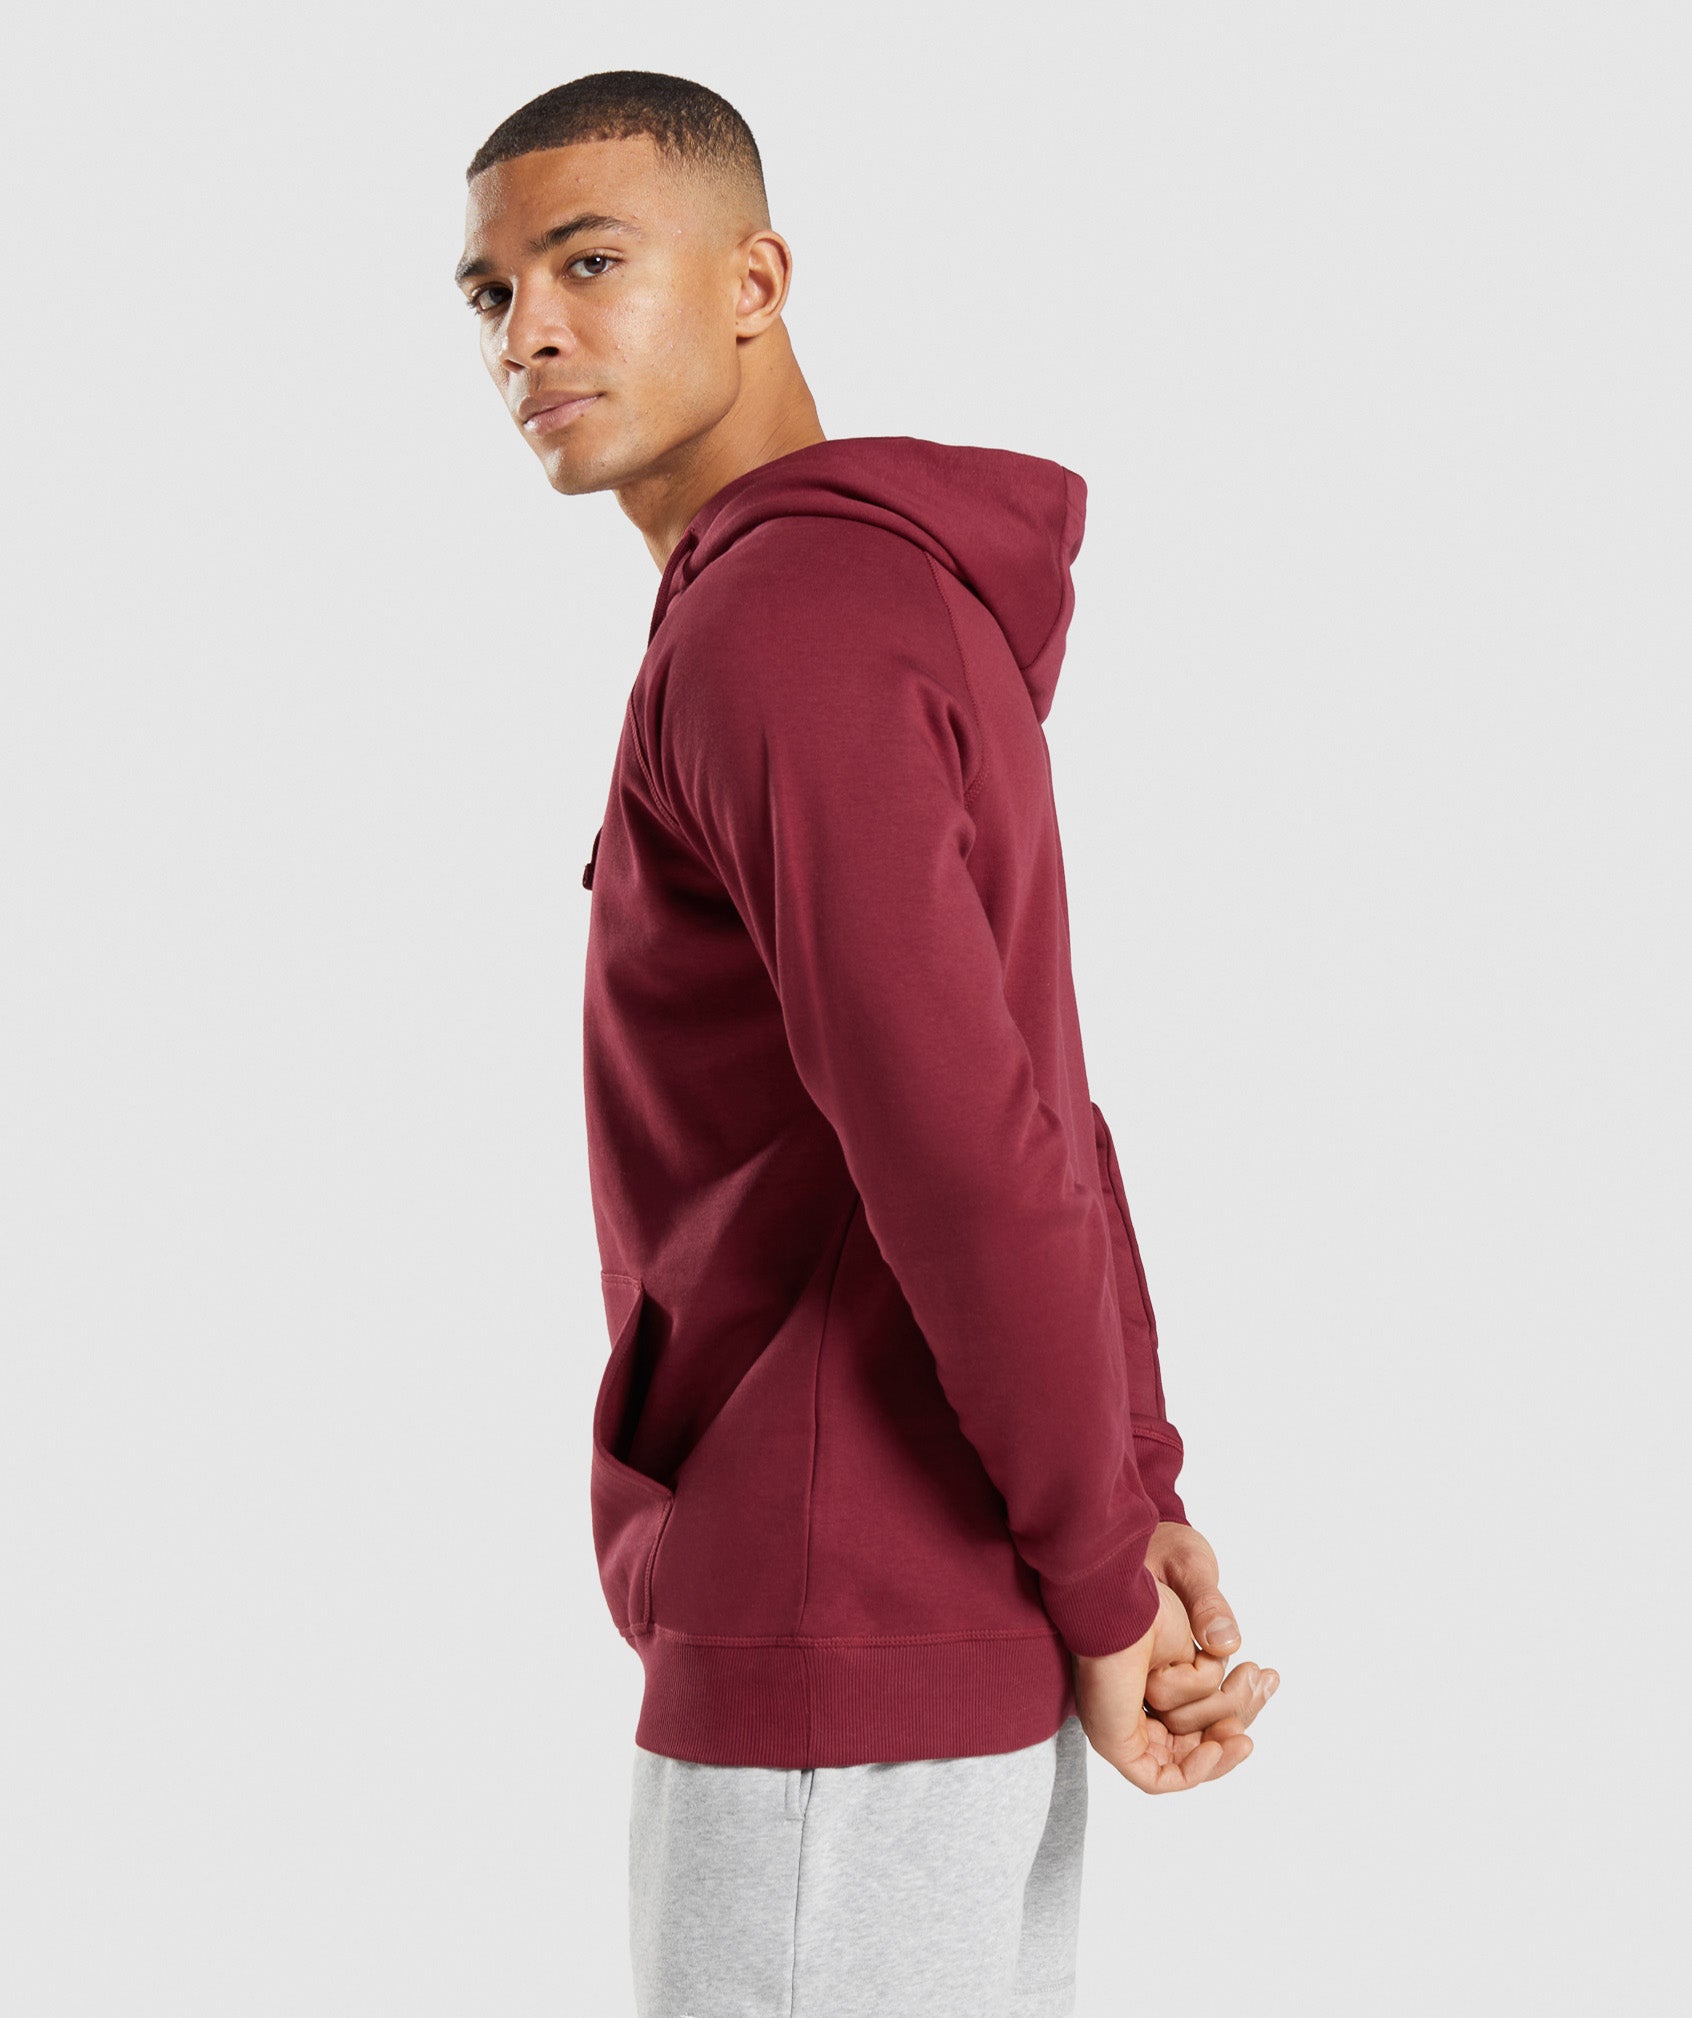 Crest Hoodie in Burgundy Red - view 4